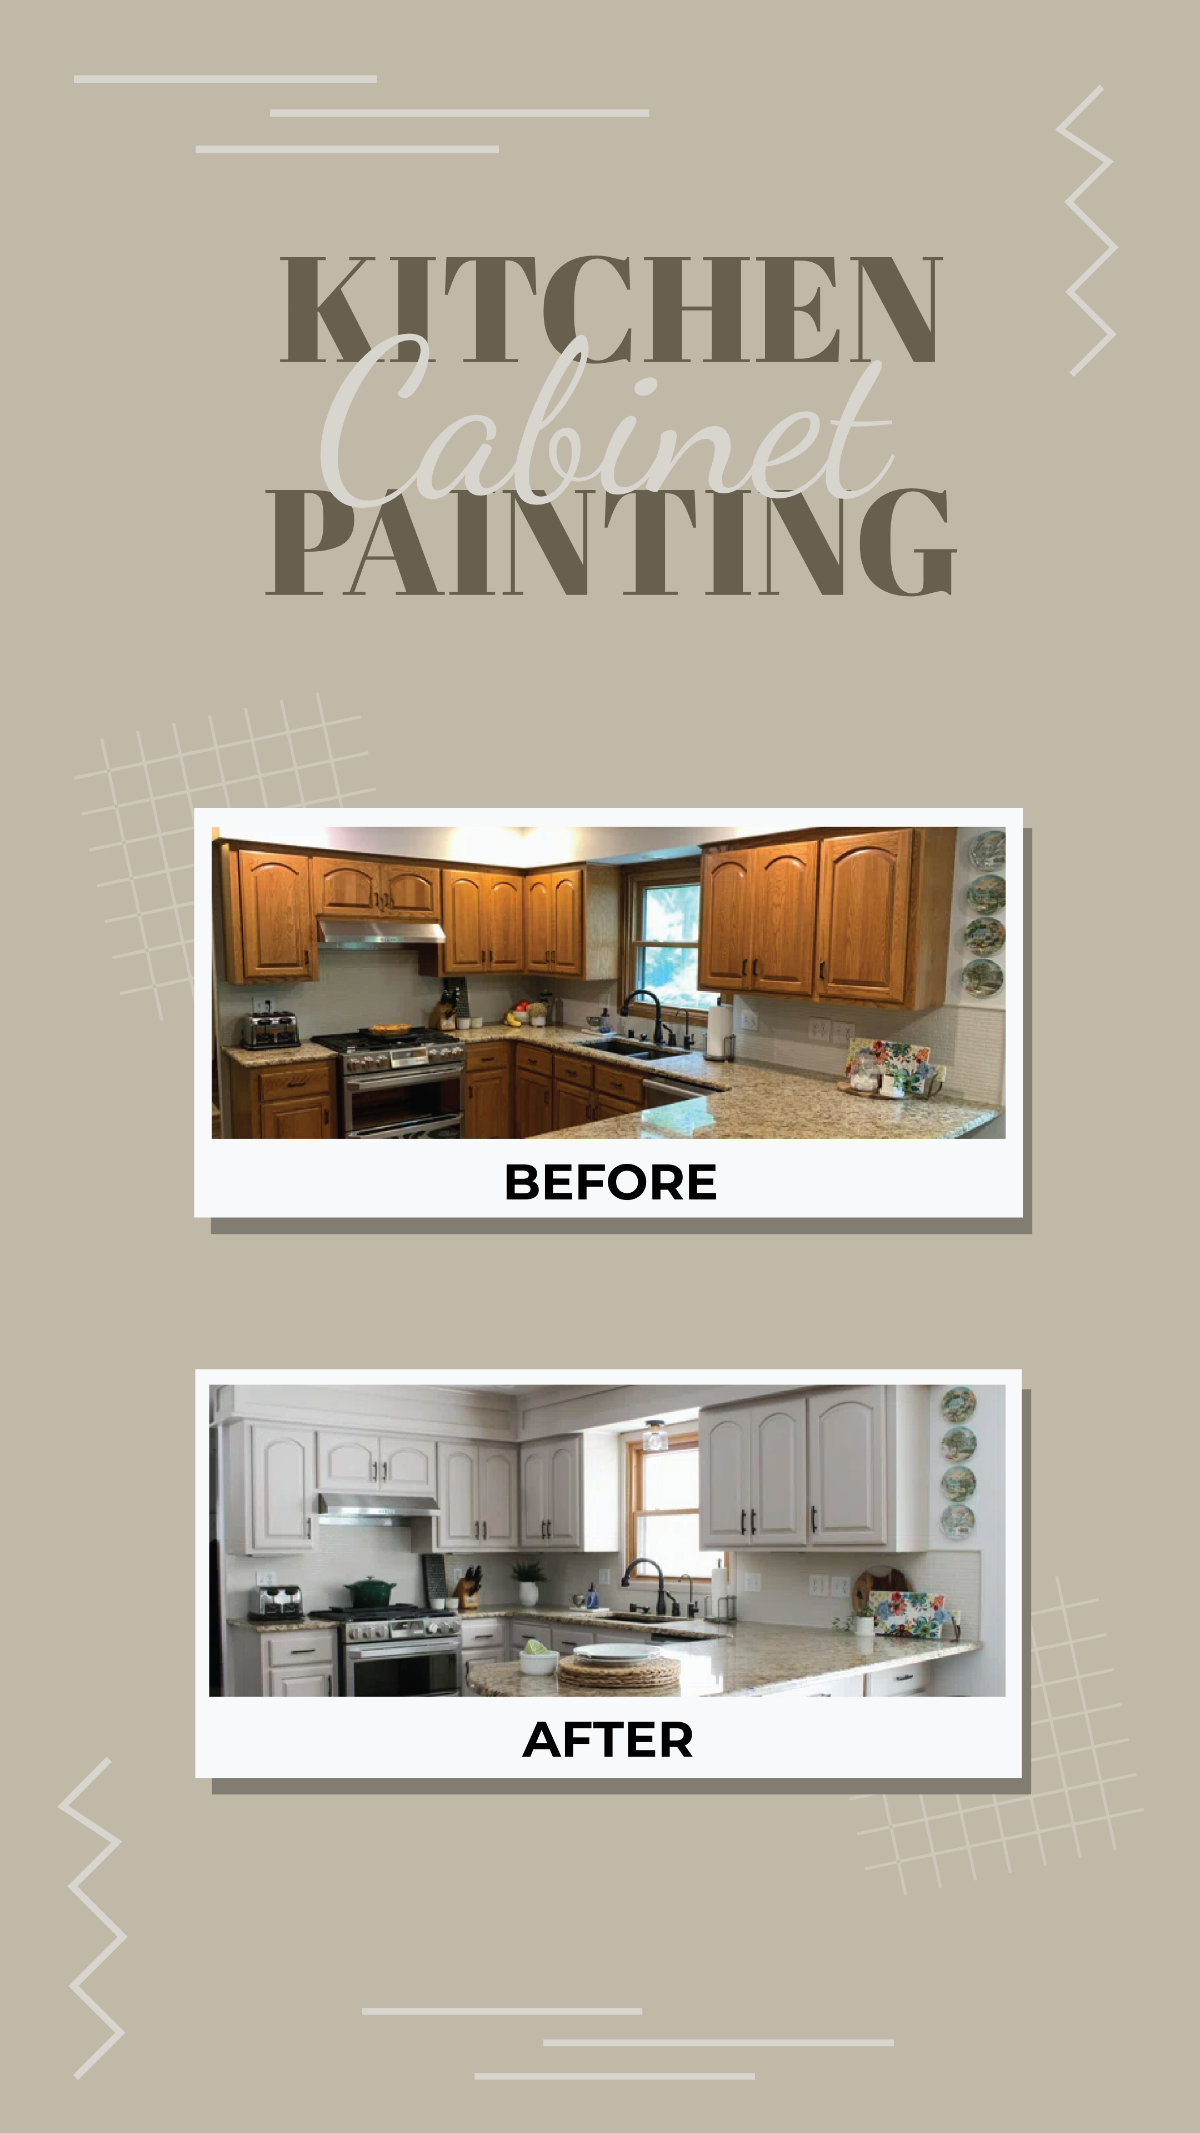 Kitchen Cabinet Painting Before and After Facebook Post Template